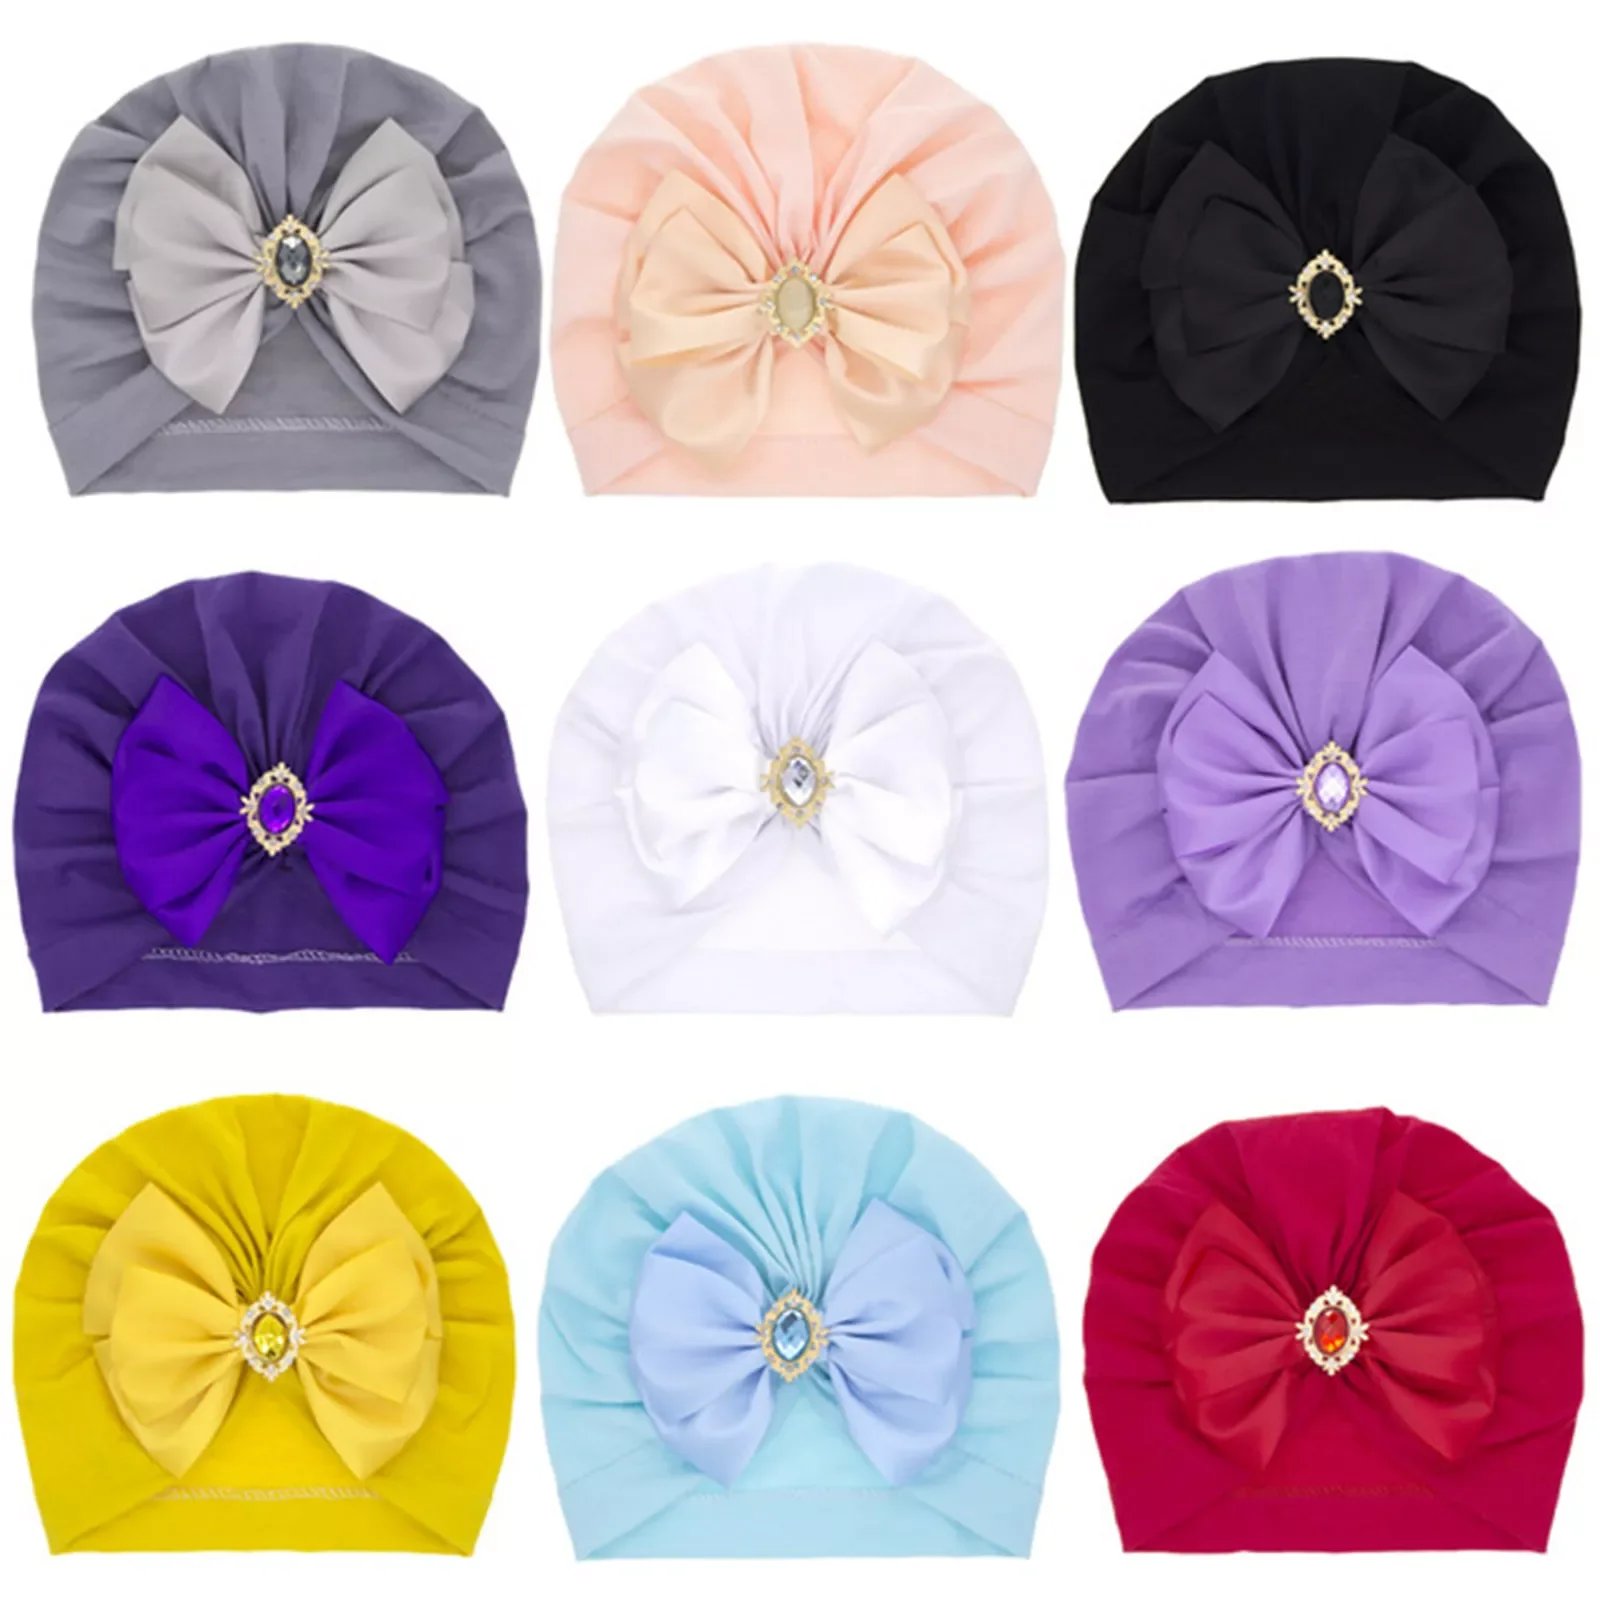 

Infant Baby Girls Turban Cap, Shiny Crystal Beanie Hat Stretchy Bonnet Headwraps with Bow Knot 0-2Years